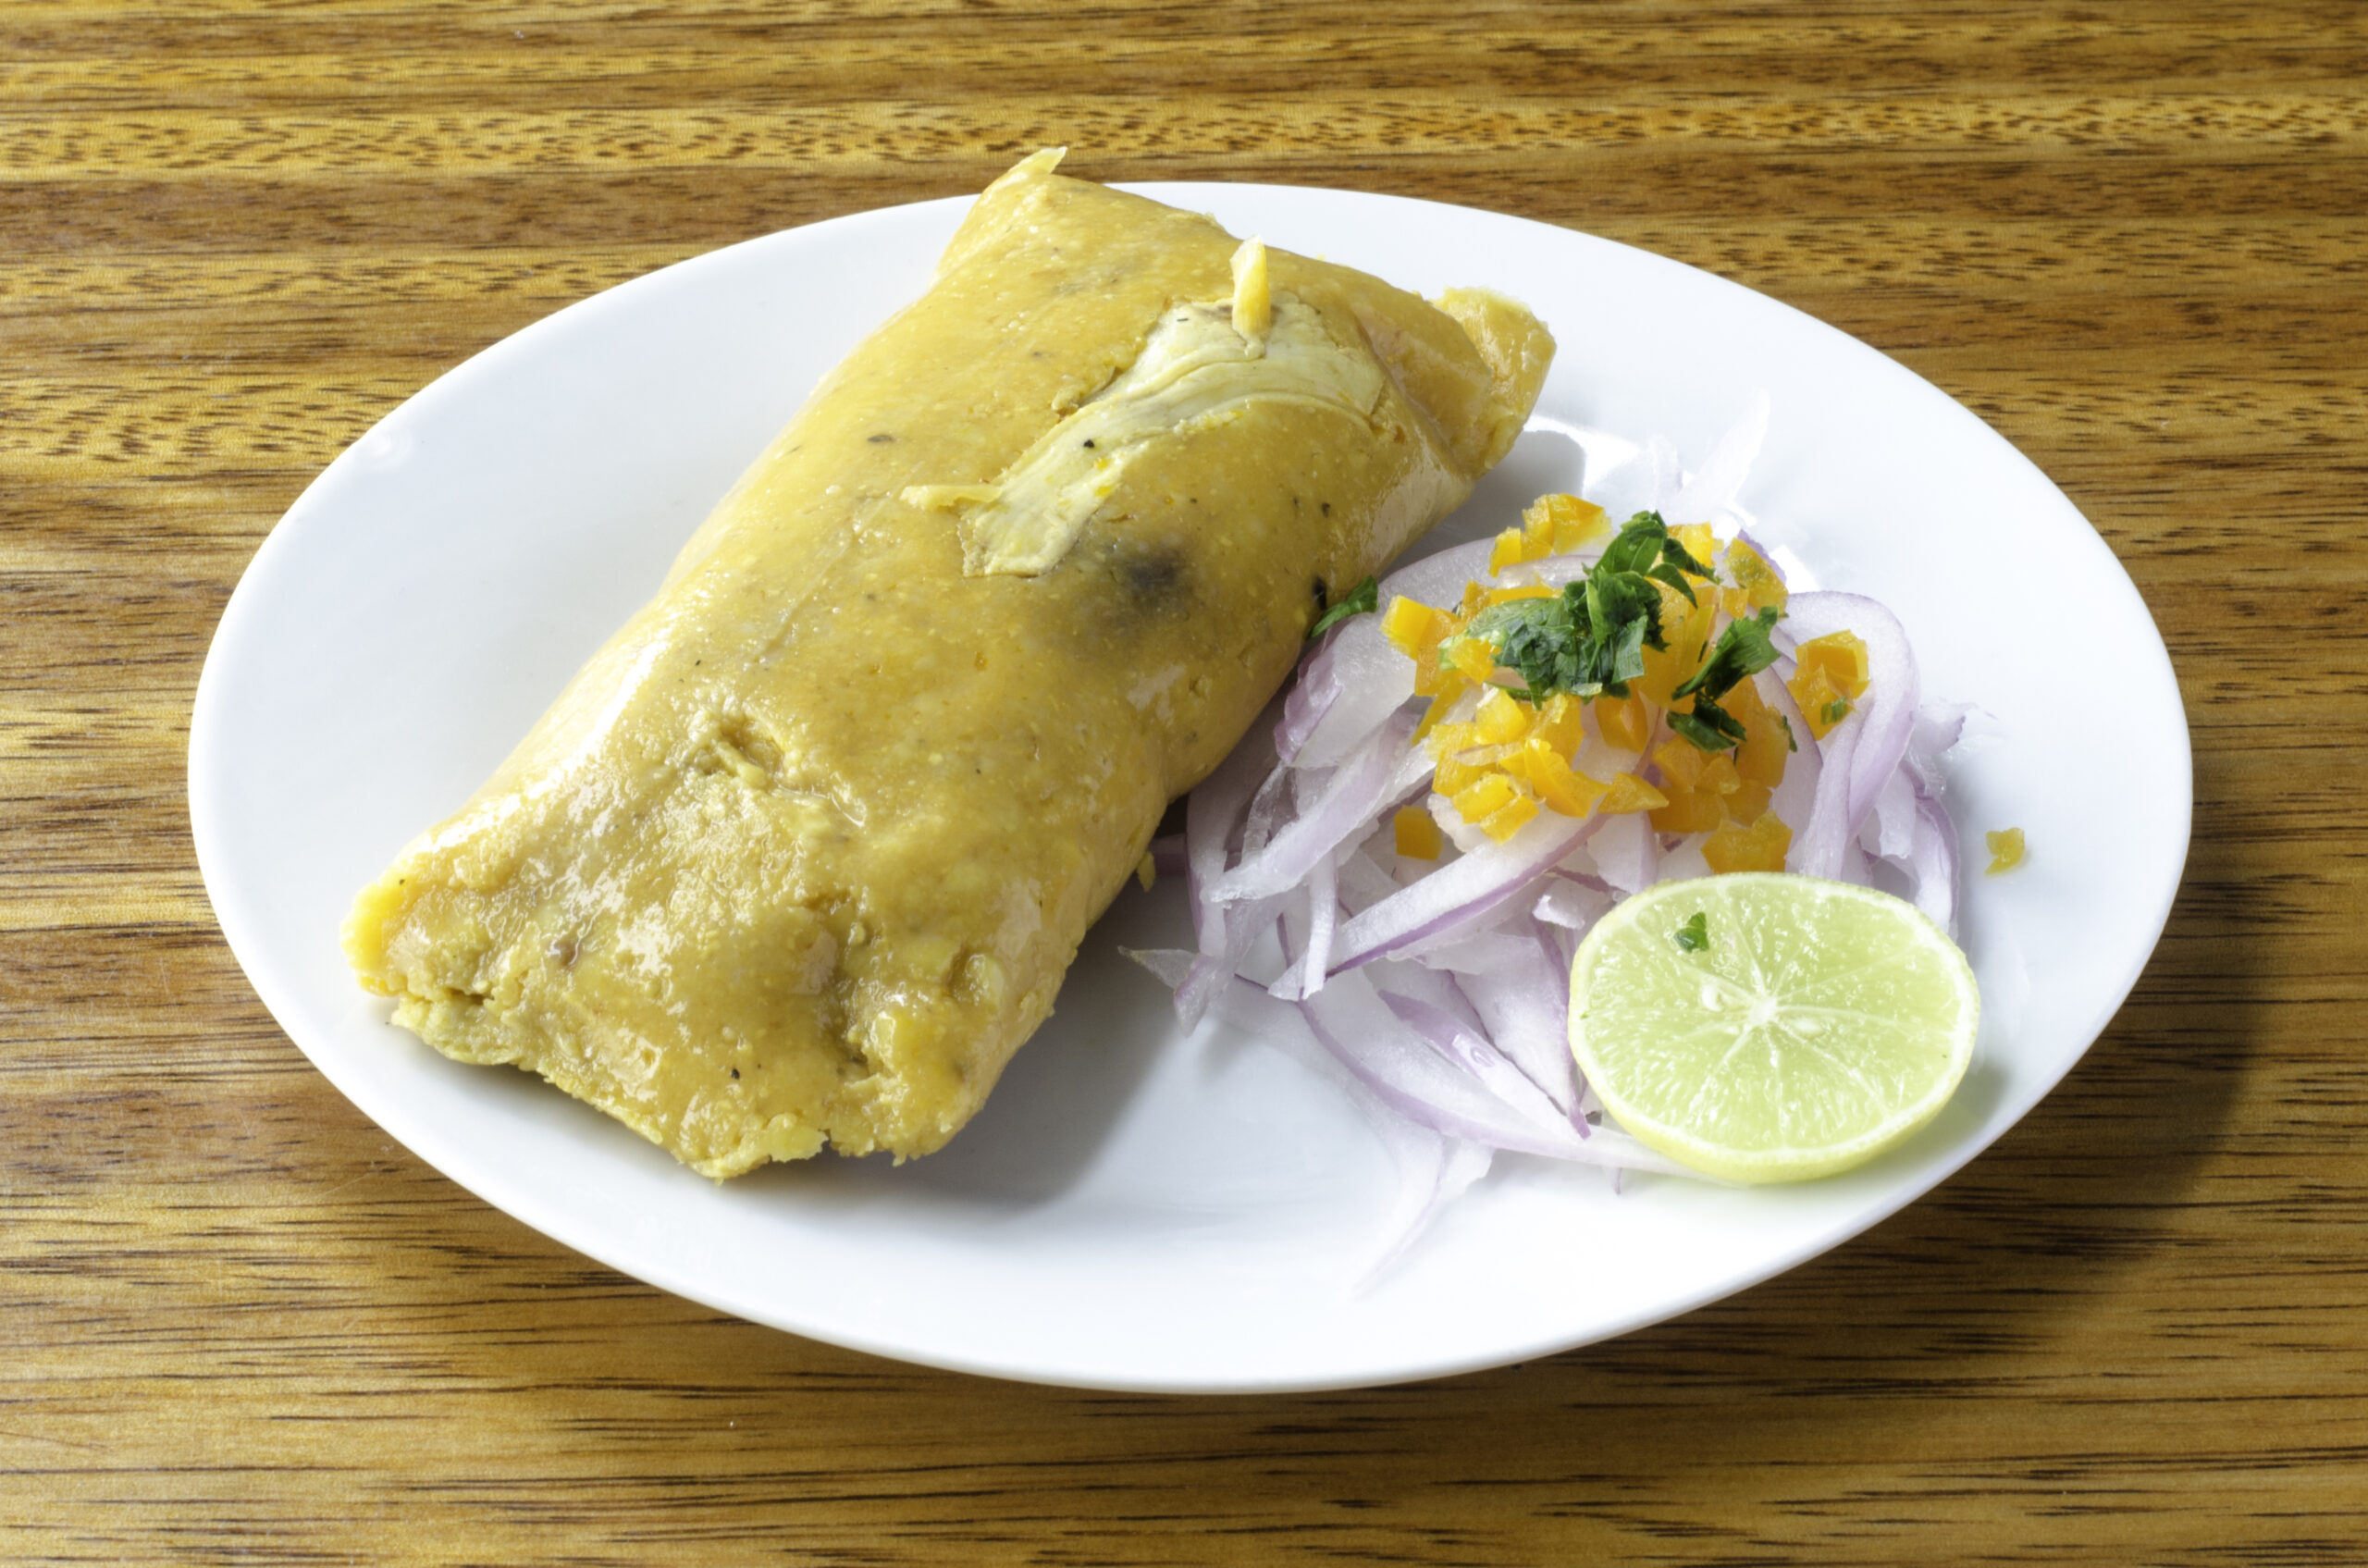 Peruvian tamale, traditionally eaten for breakfast on Sundays, made of corn and chicken and served with salsa criolla - onion salad